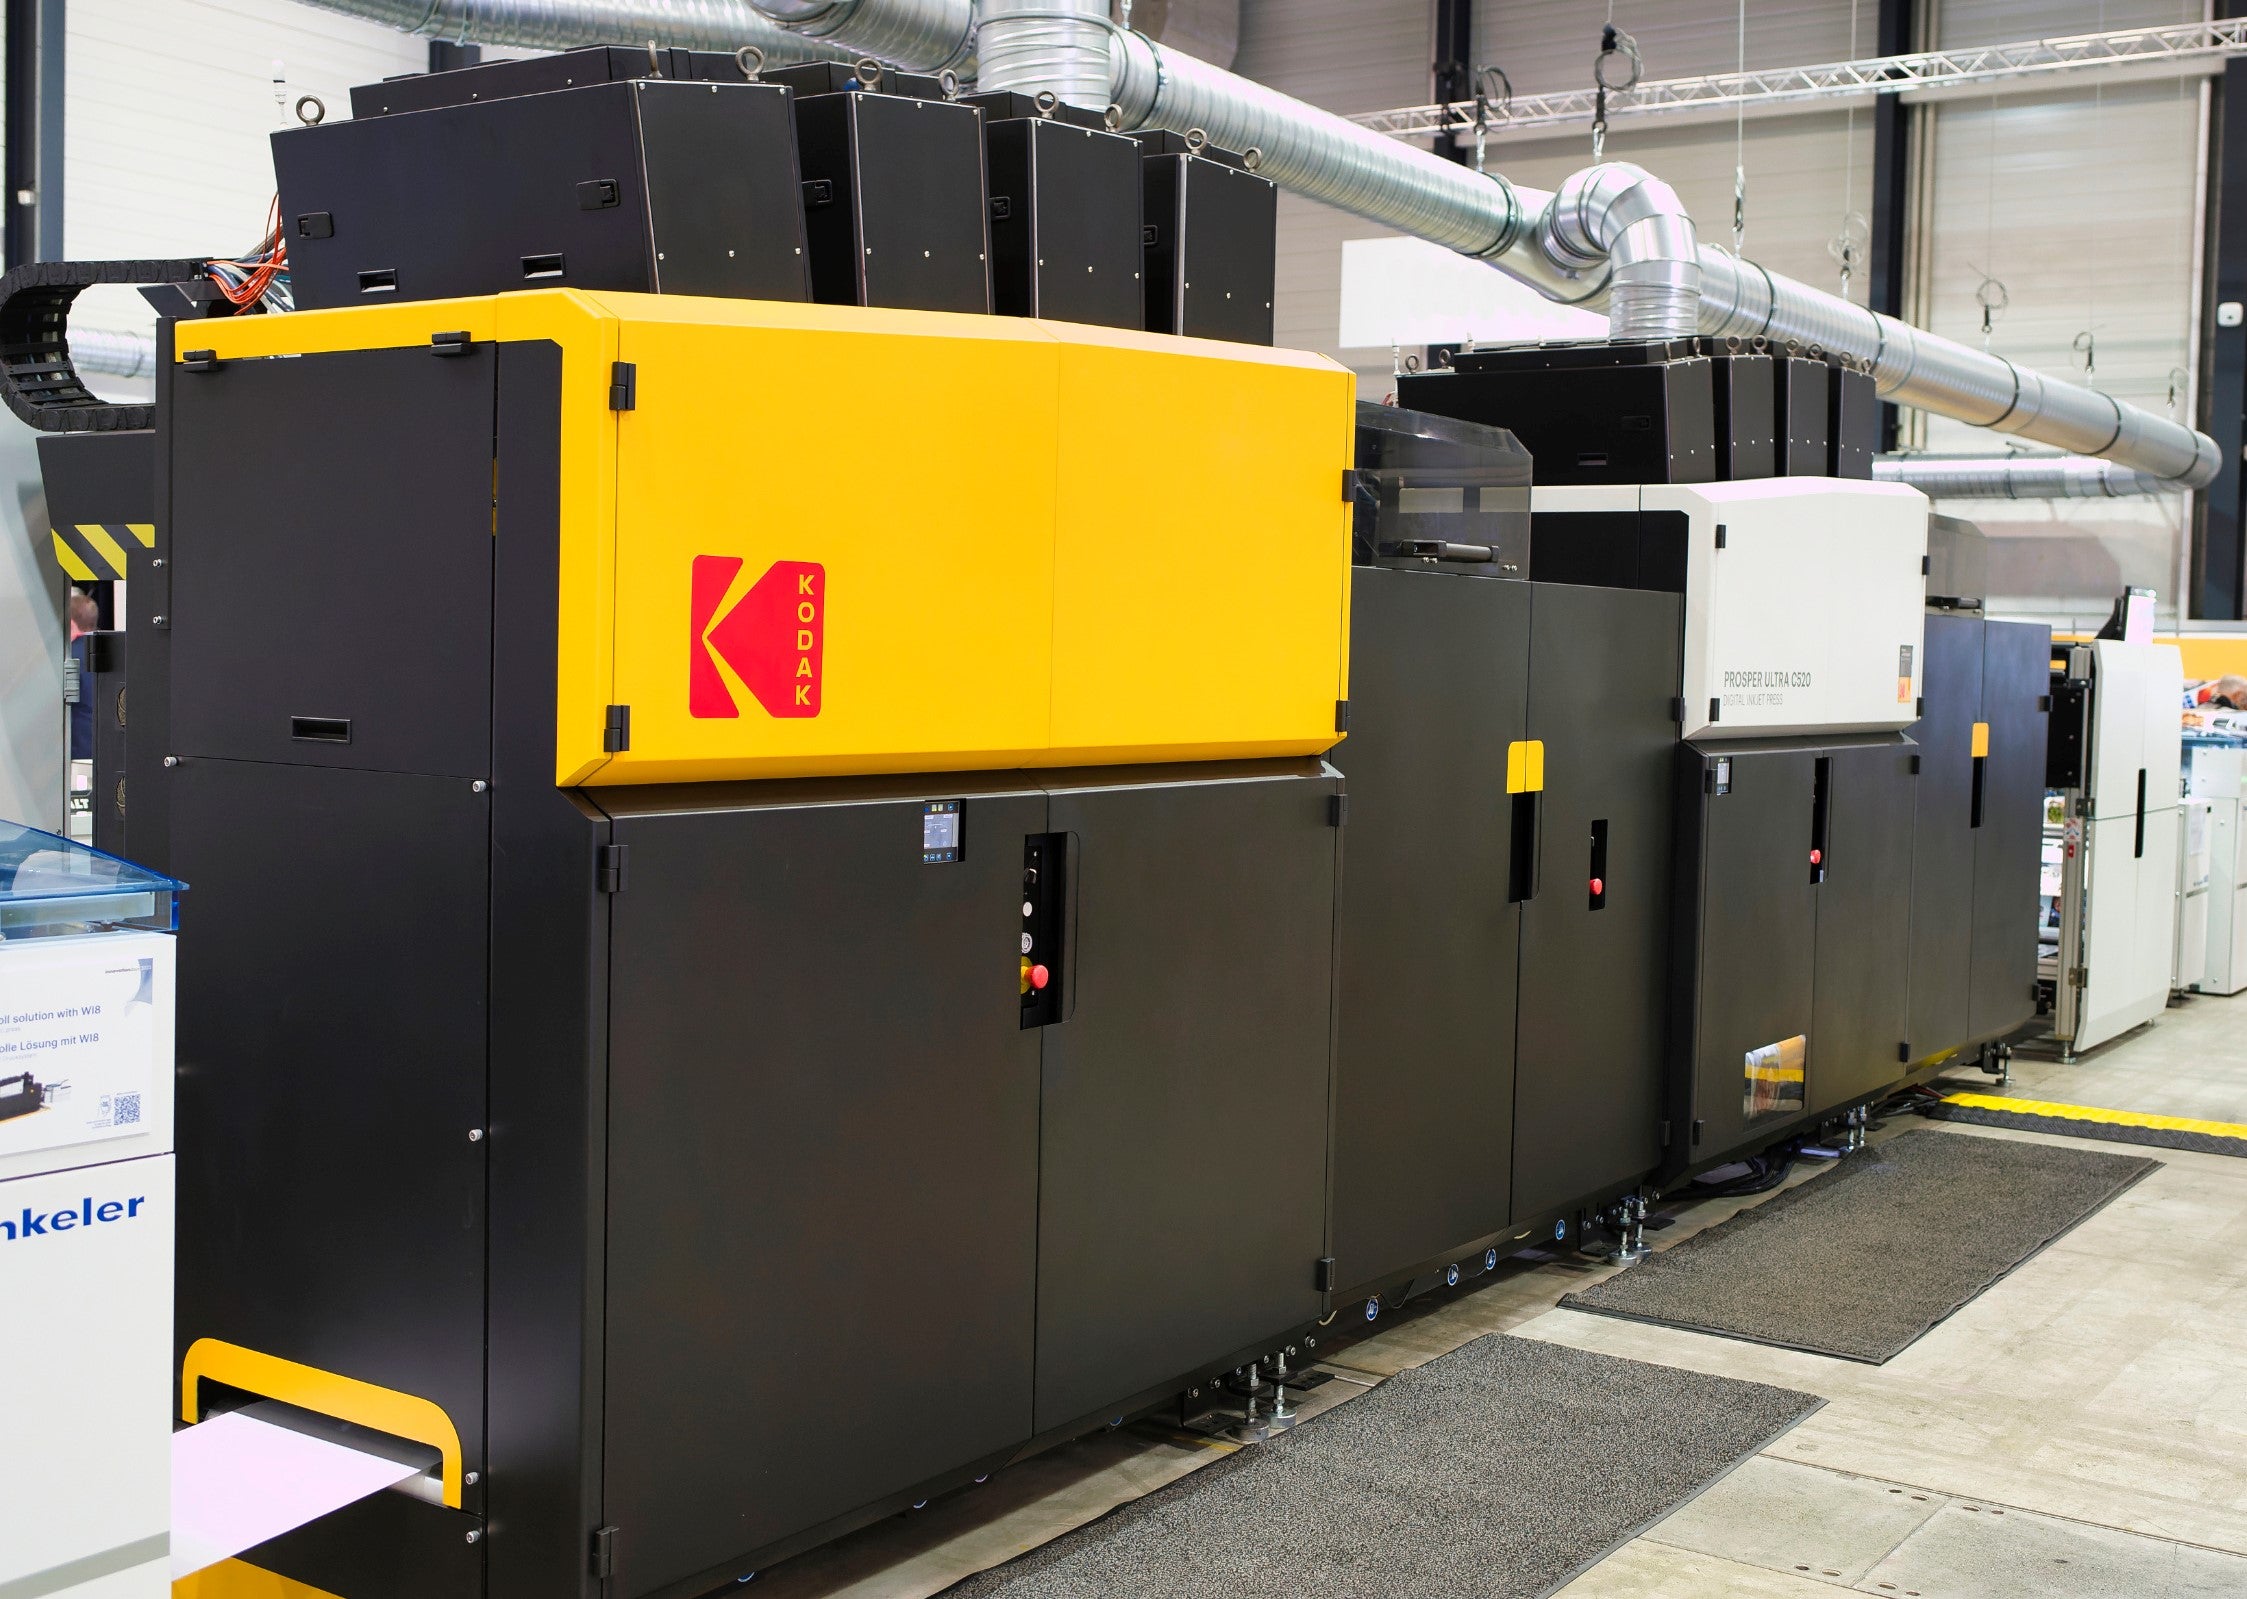 State of the art: The KODAK PROSPER ULTRA 520 Press rivals traditional printing processes in terms of productivity and cost-effectiveness